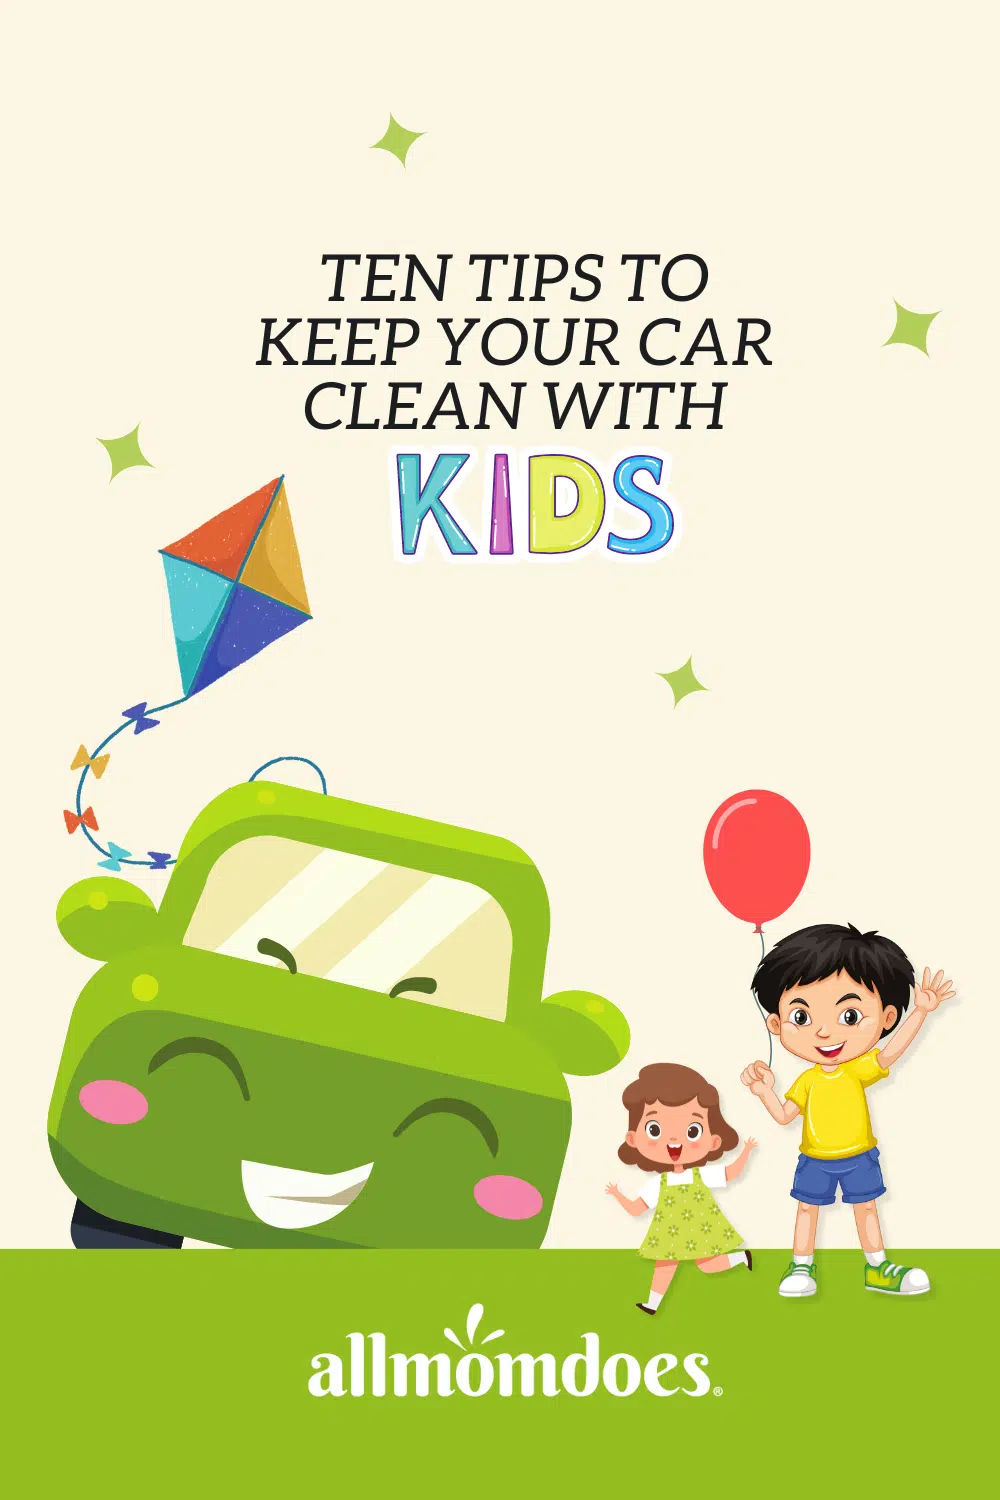 10 Tips for Keeping Your Car Clean